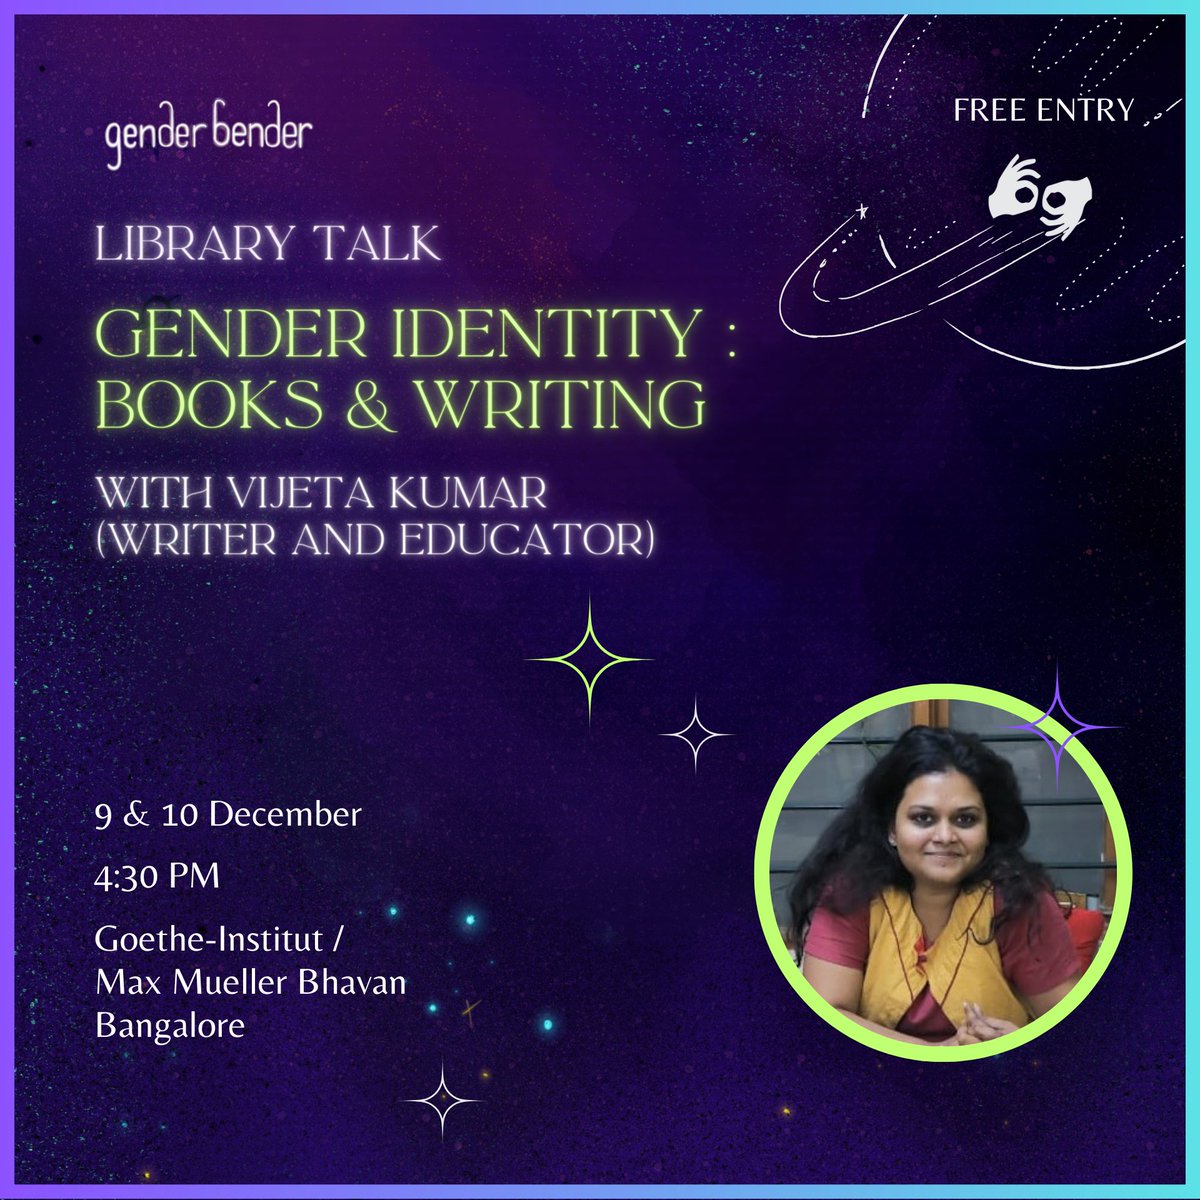 Exploring Gender Identity through 'Books & Writing' with Vijeta Kumar (Writer & Educator)📚✨ She will be sharing personal stories around books, book shops and libraries. 📅 Date: 9th & 10th Dec 🕟 Time: 4:30 PM 📍 Venue: Goethe-Institut / Max Mueller Bhavan Bangalore